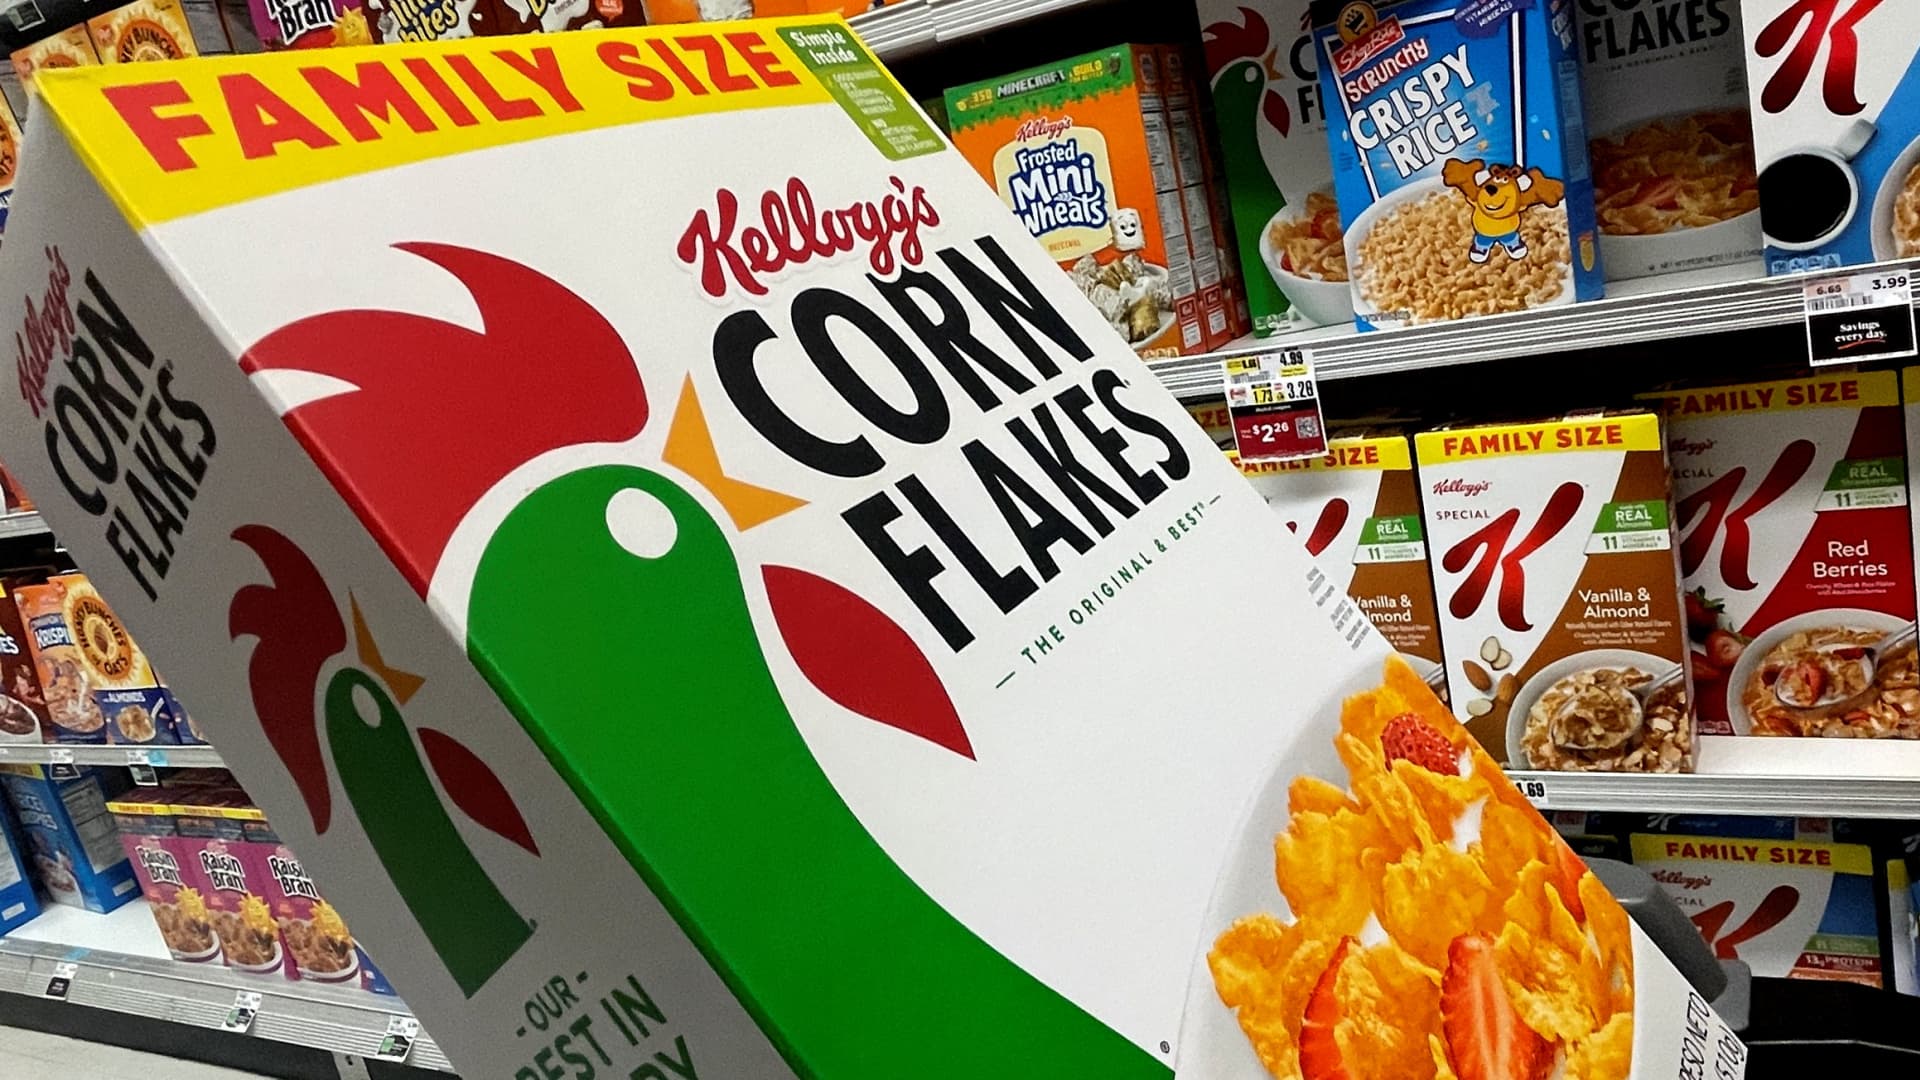 Kellogg, General Mills, Post cereal sales slow after pandemic surge
– News X